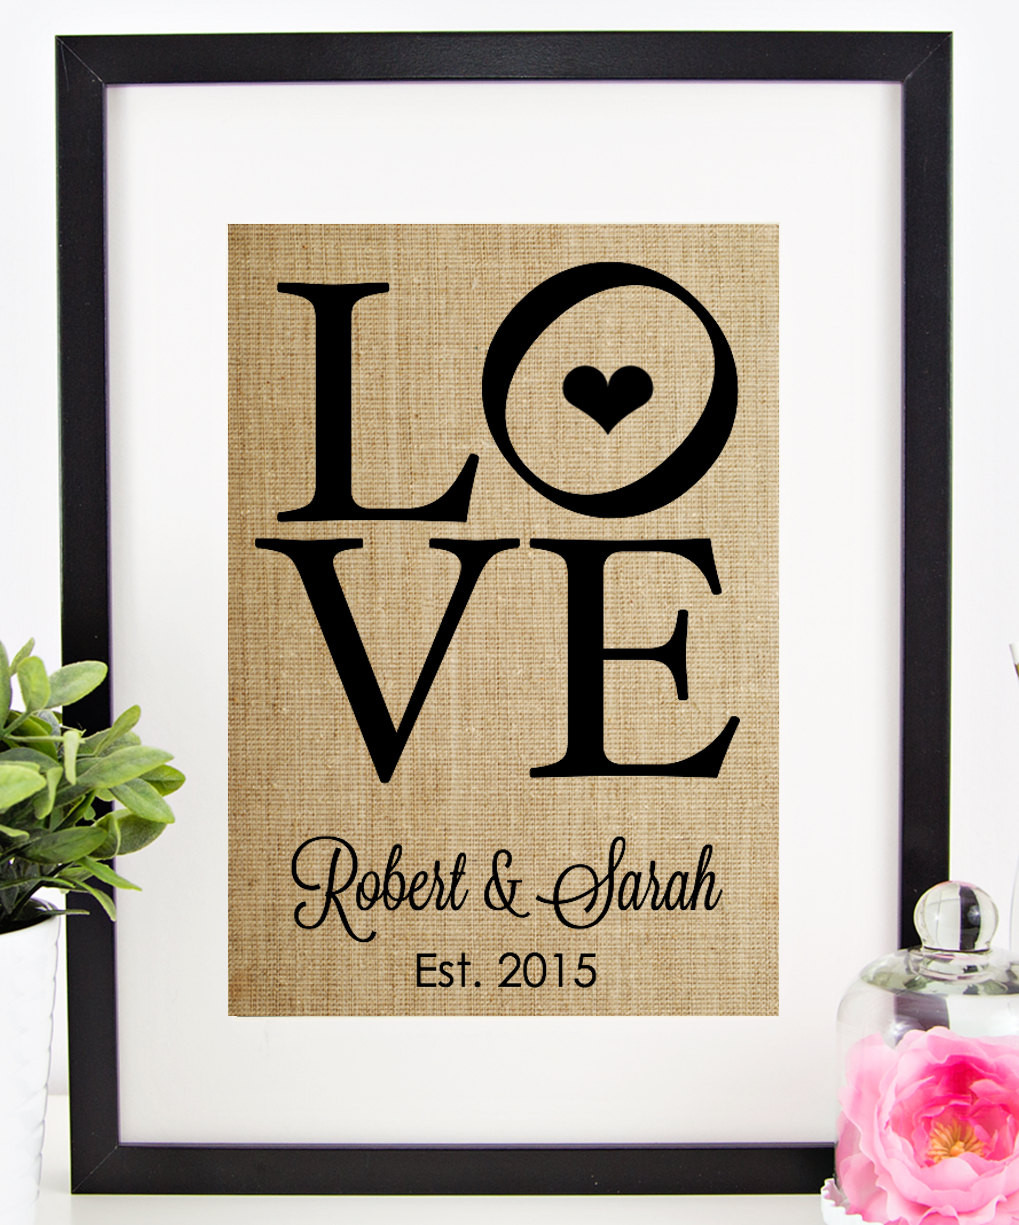 Couple Wedding Gift Ideas
 Personalized Wedding Gift for Couple Burlap Print LOVE Sign